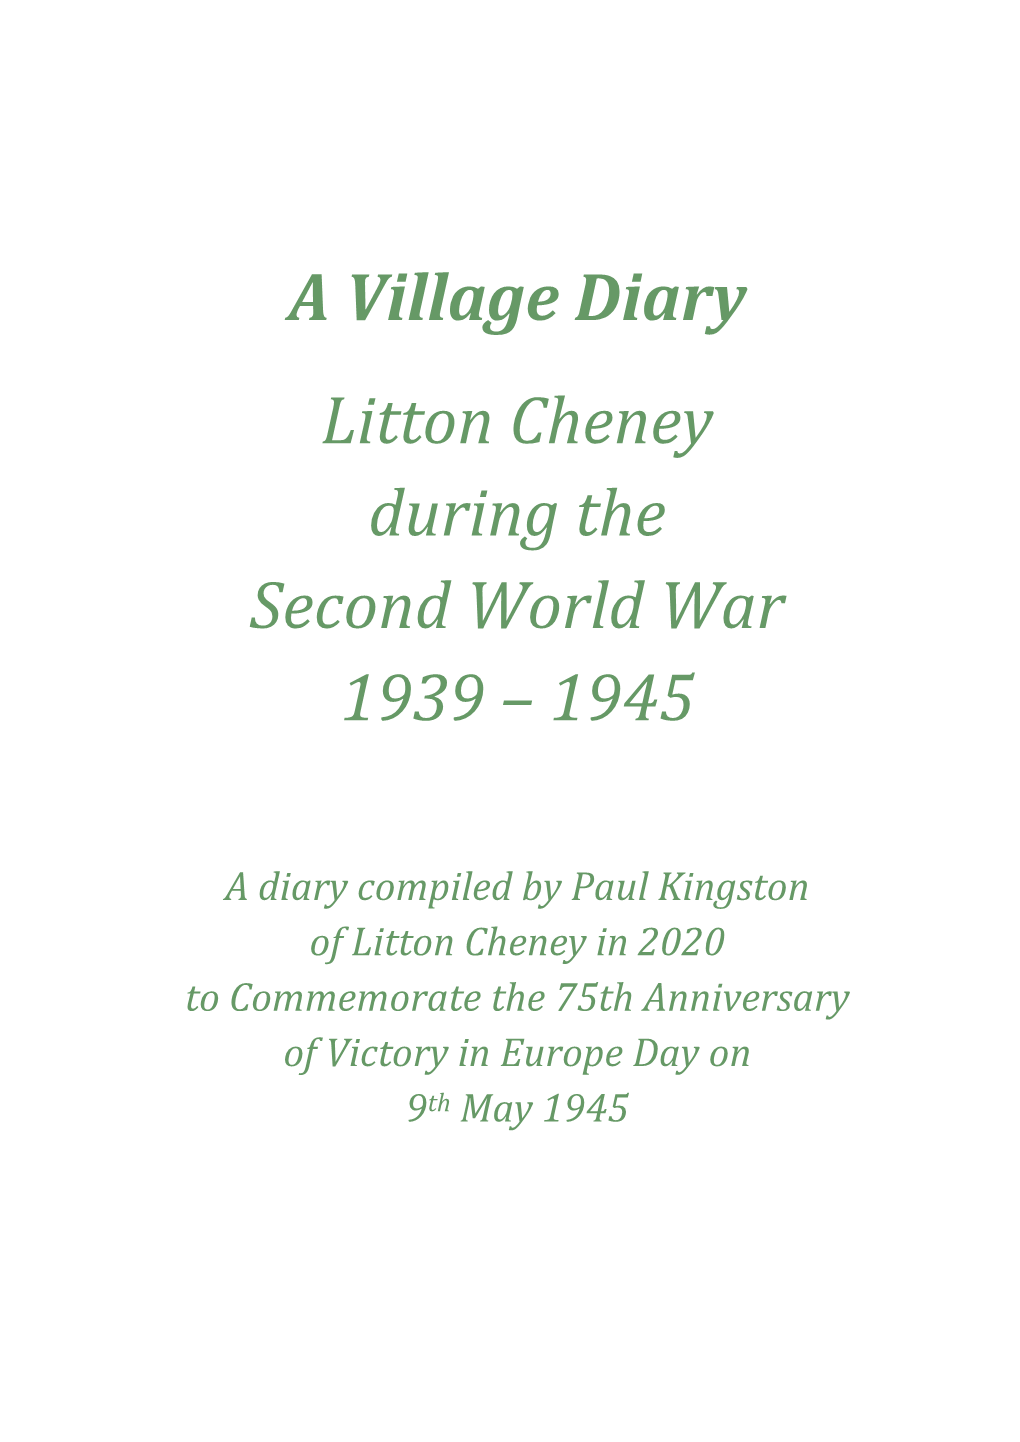 A Village Diary Litton Cheney During the Second World War 1939 – 1945